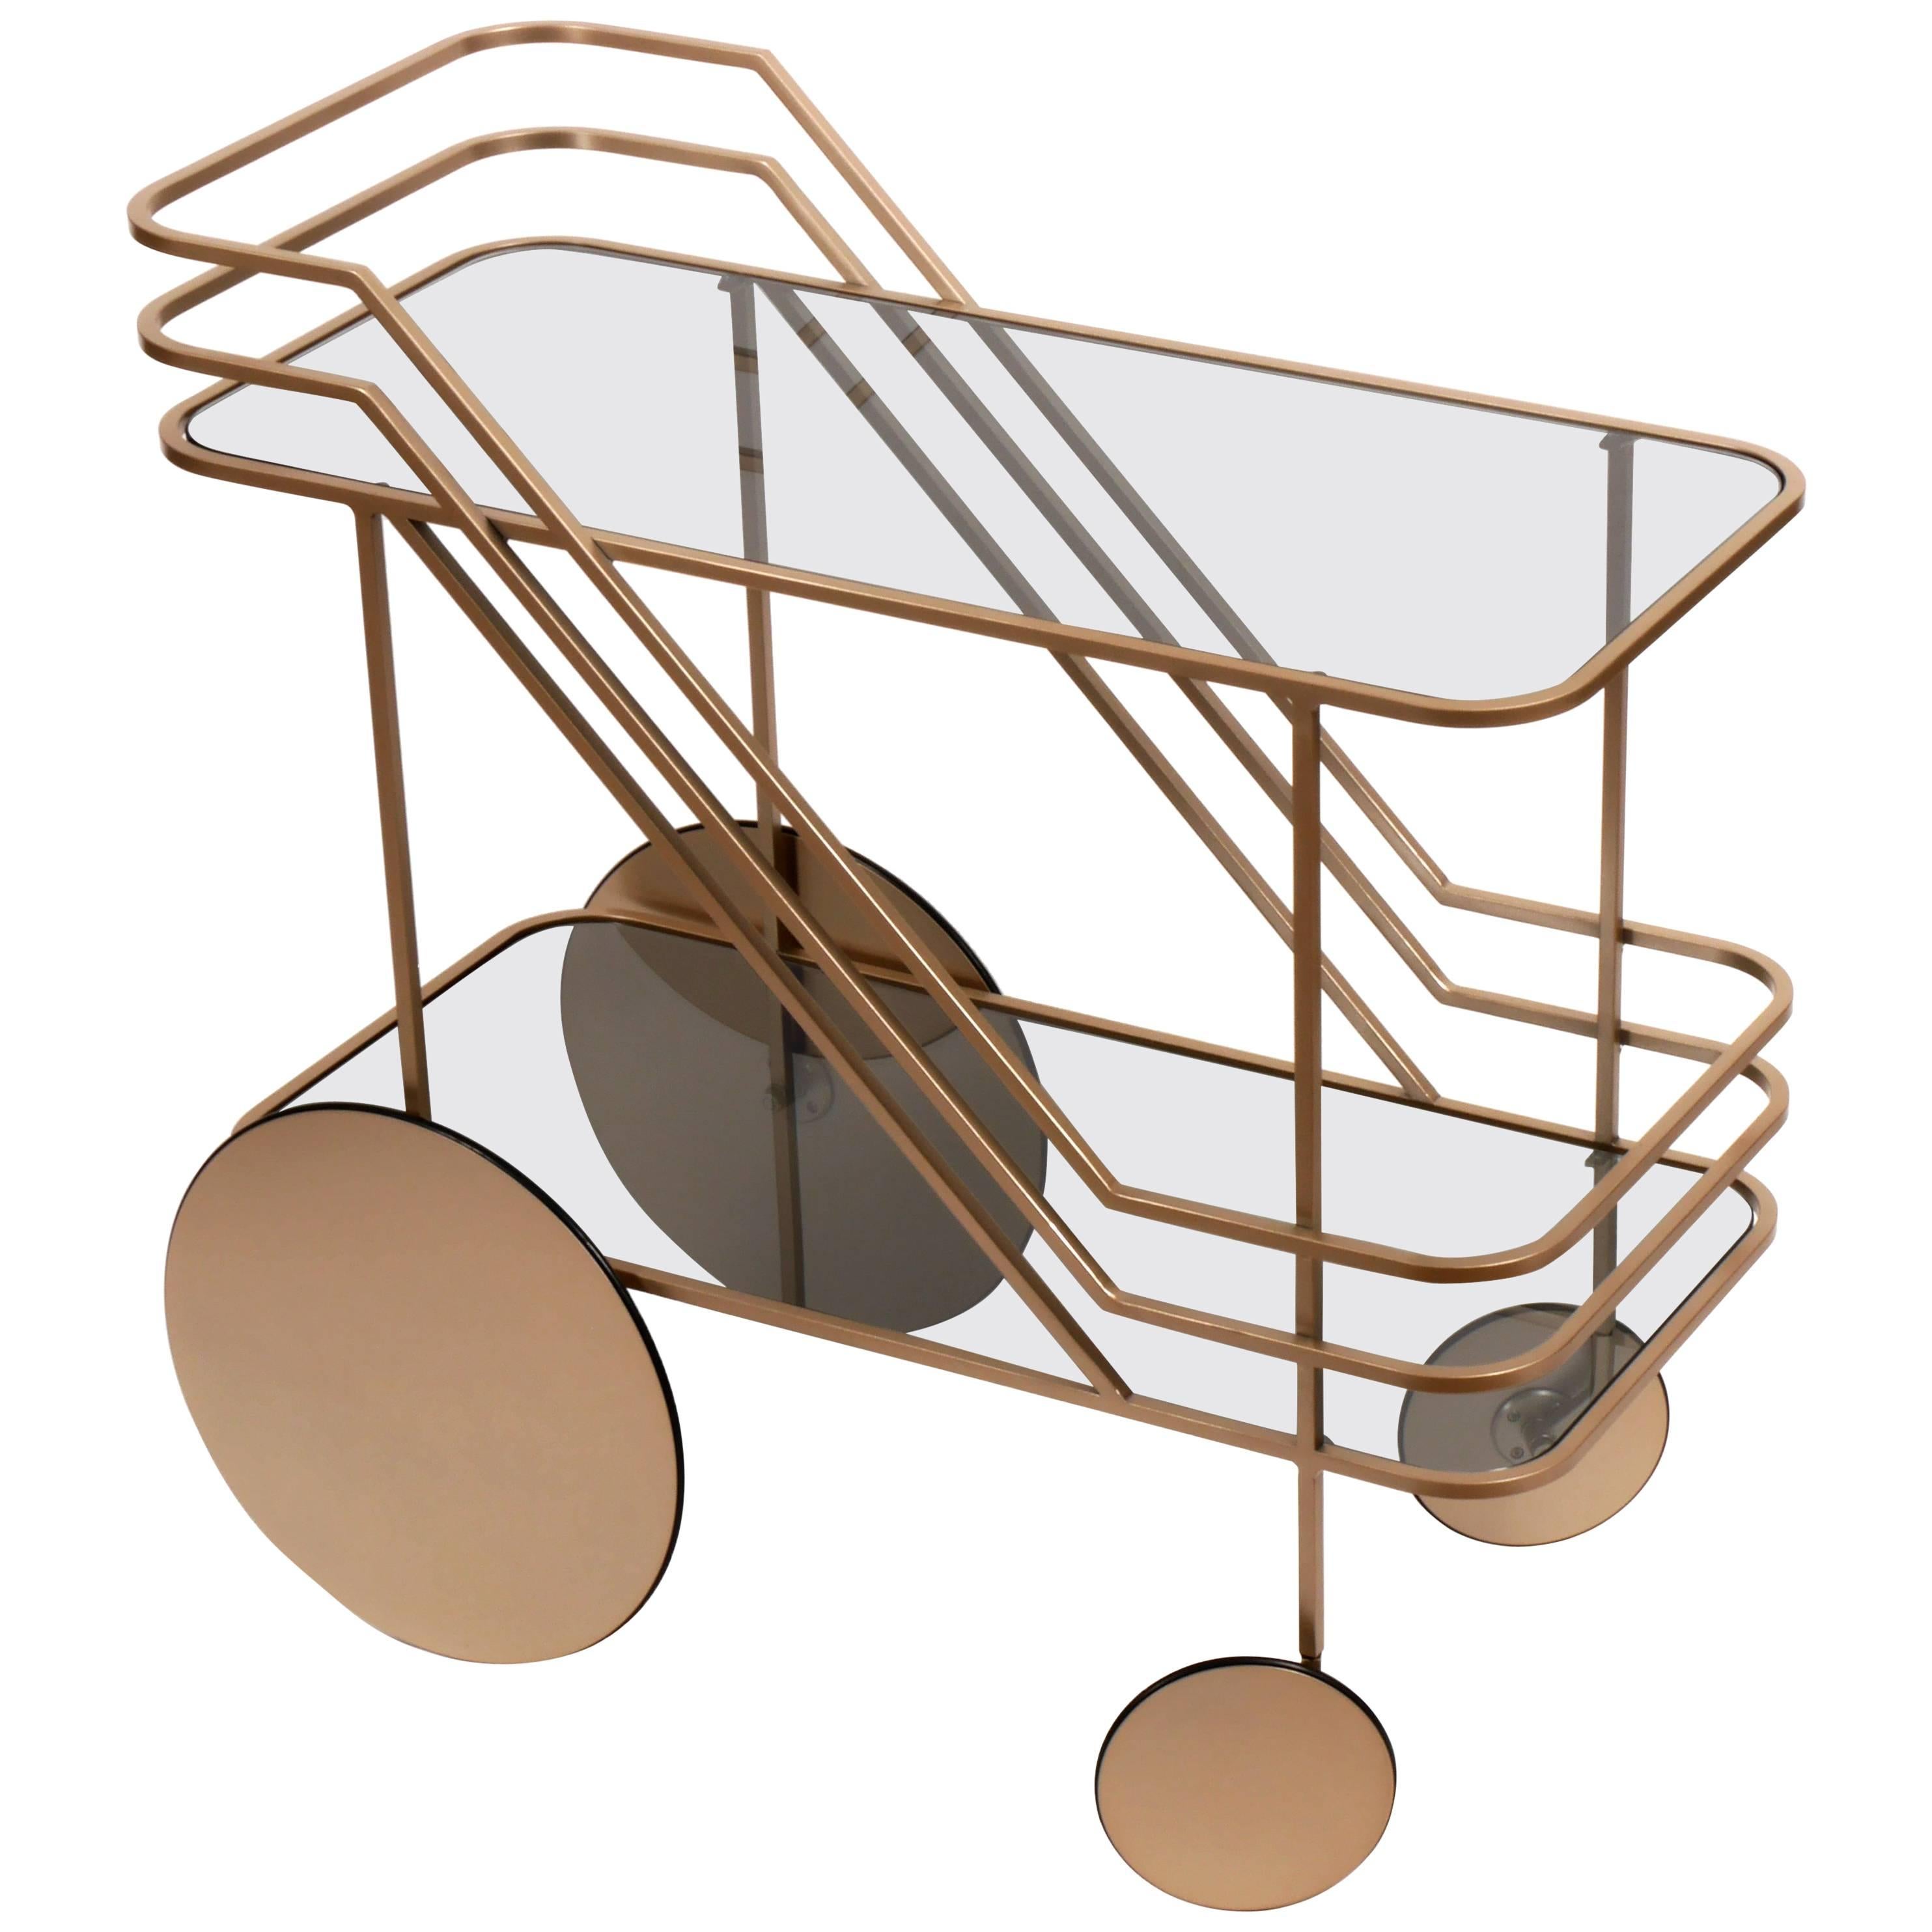 Dante Goods and Bads Come as You Are Bar Cart in Champagne For Sale